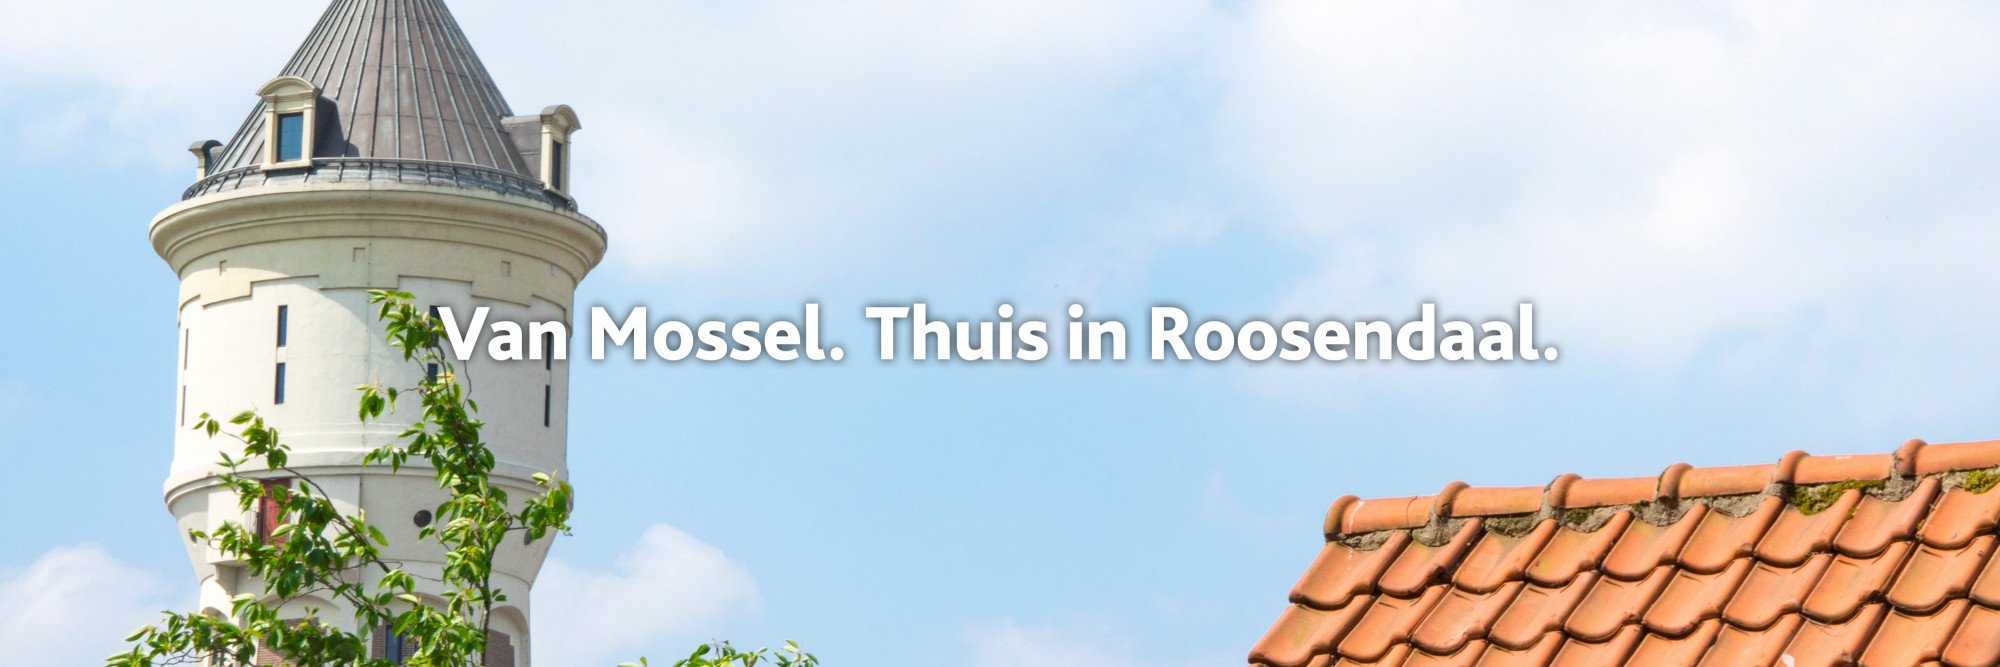 Thuis in Roosendaal 1